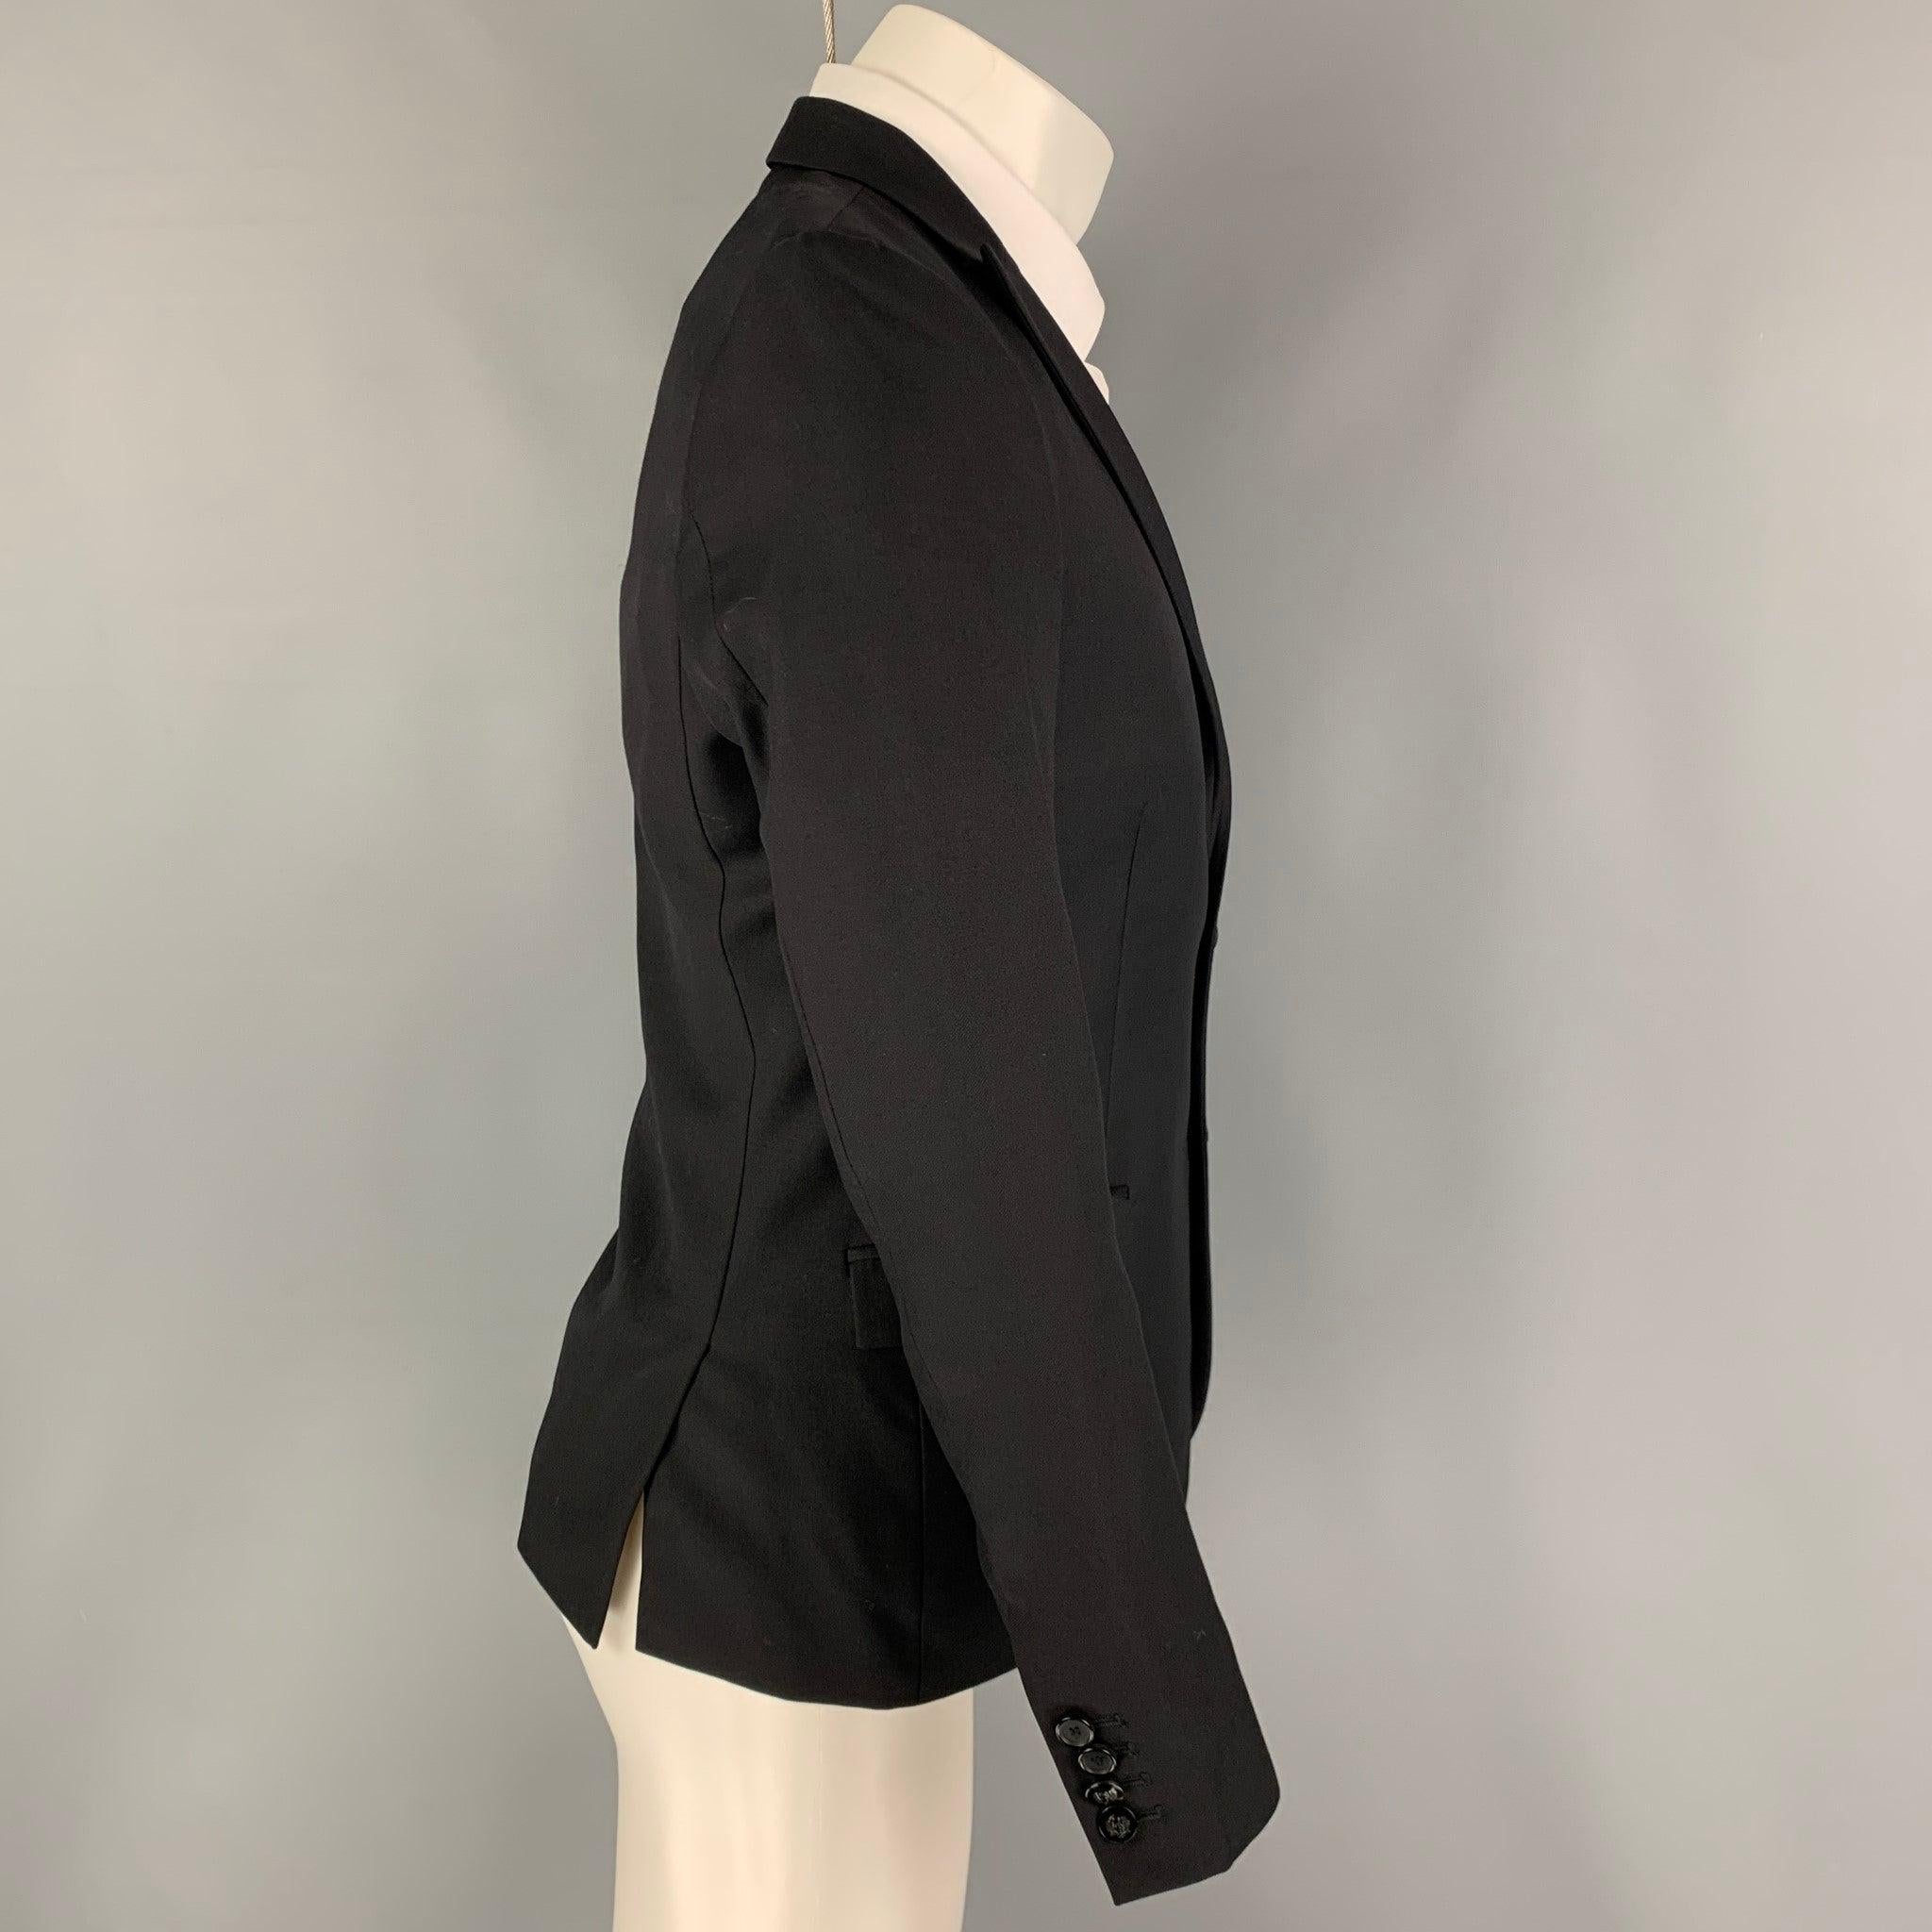 THE KOOPLES sport coat comes in a black wool with a full liner featuring a peak lapel, flap pockets, double back vent,and a double button closure.
Excellent
Pre-Owned Condition. 

Marked:   46 

Measurements: 
 
Shoulder: 16 inches Chest: 36 inches